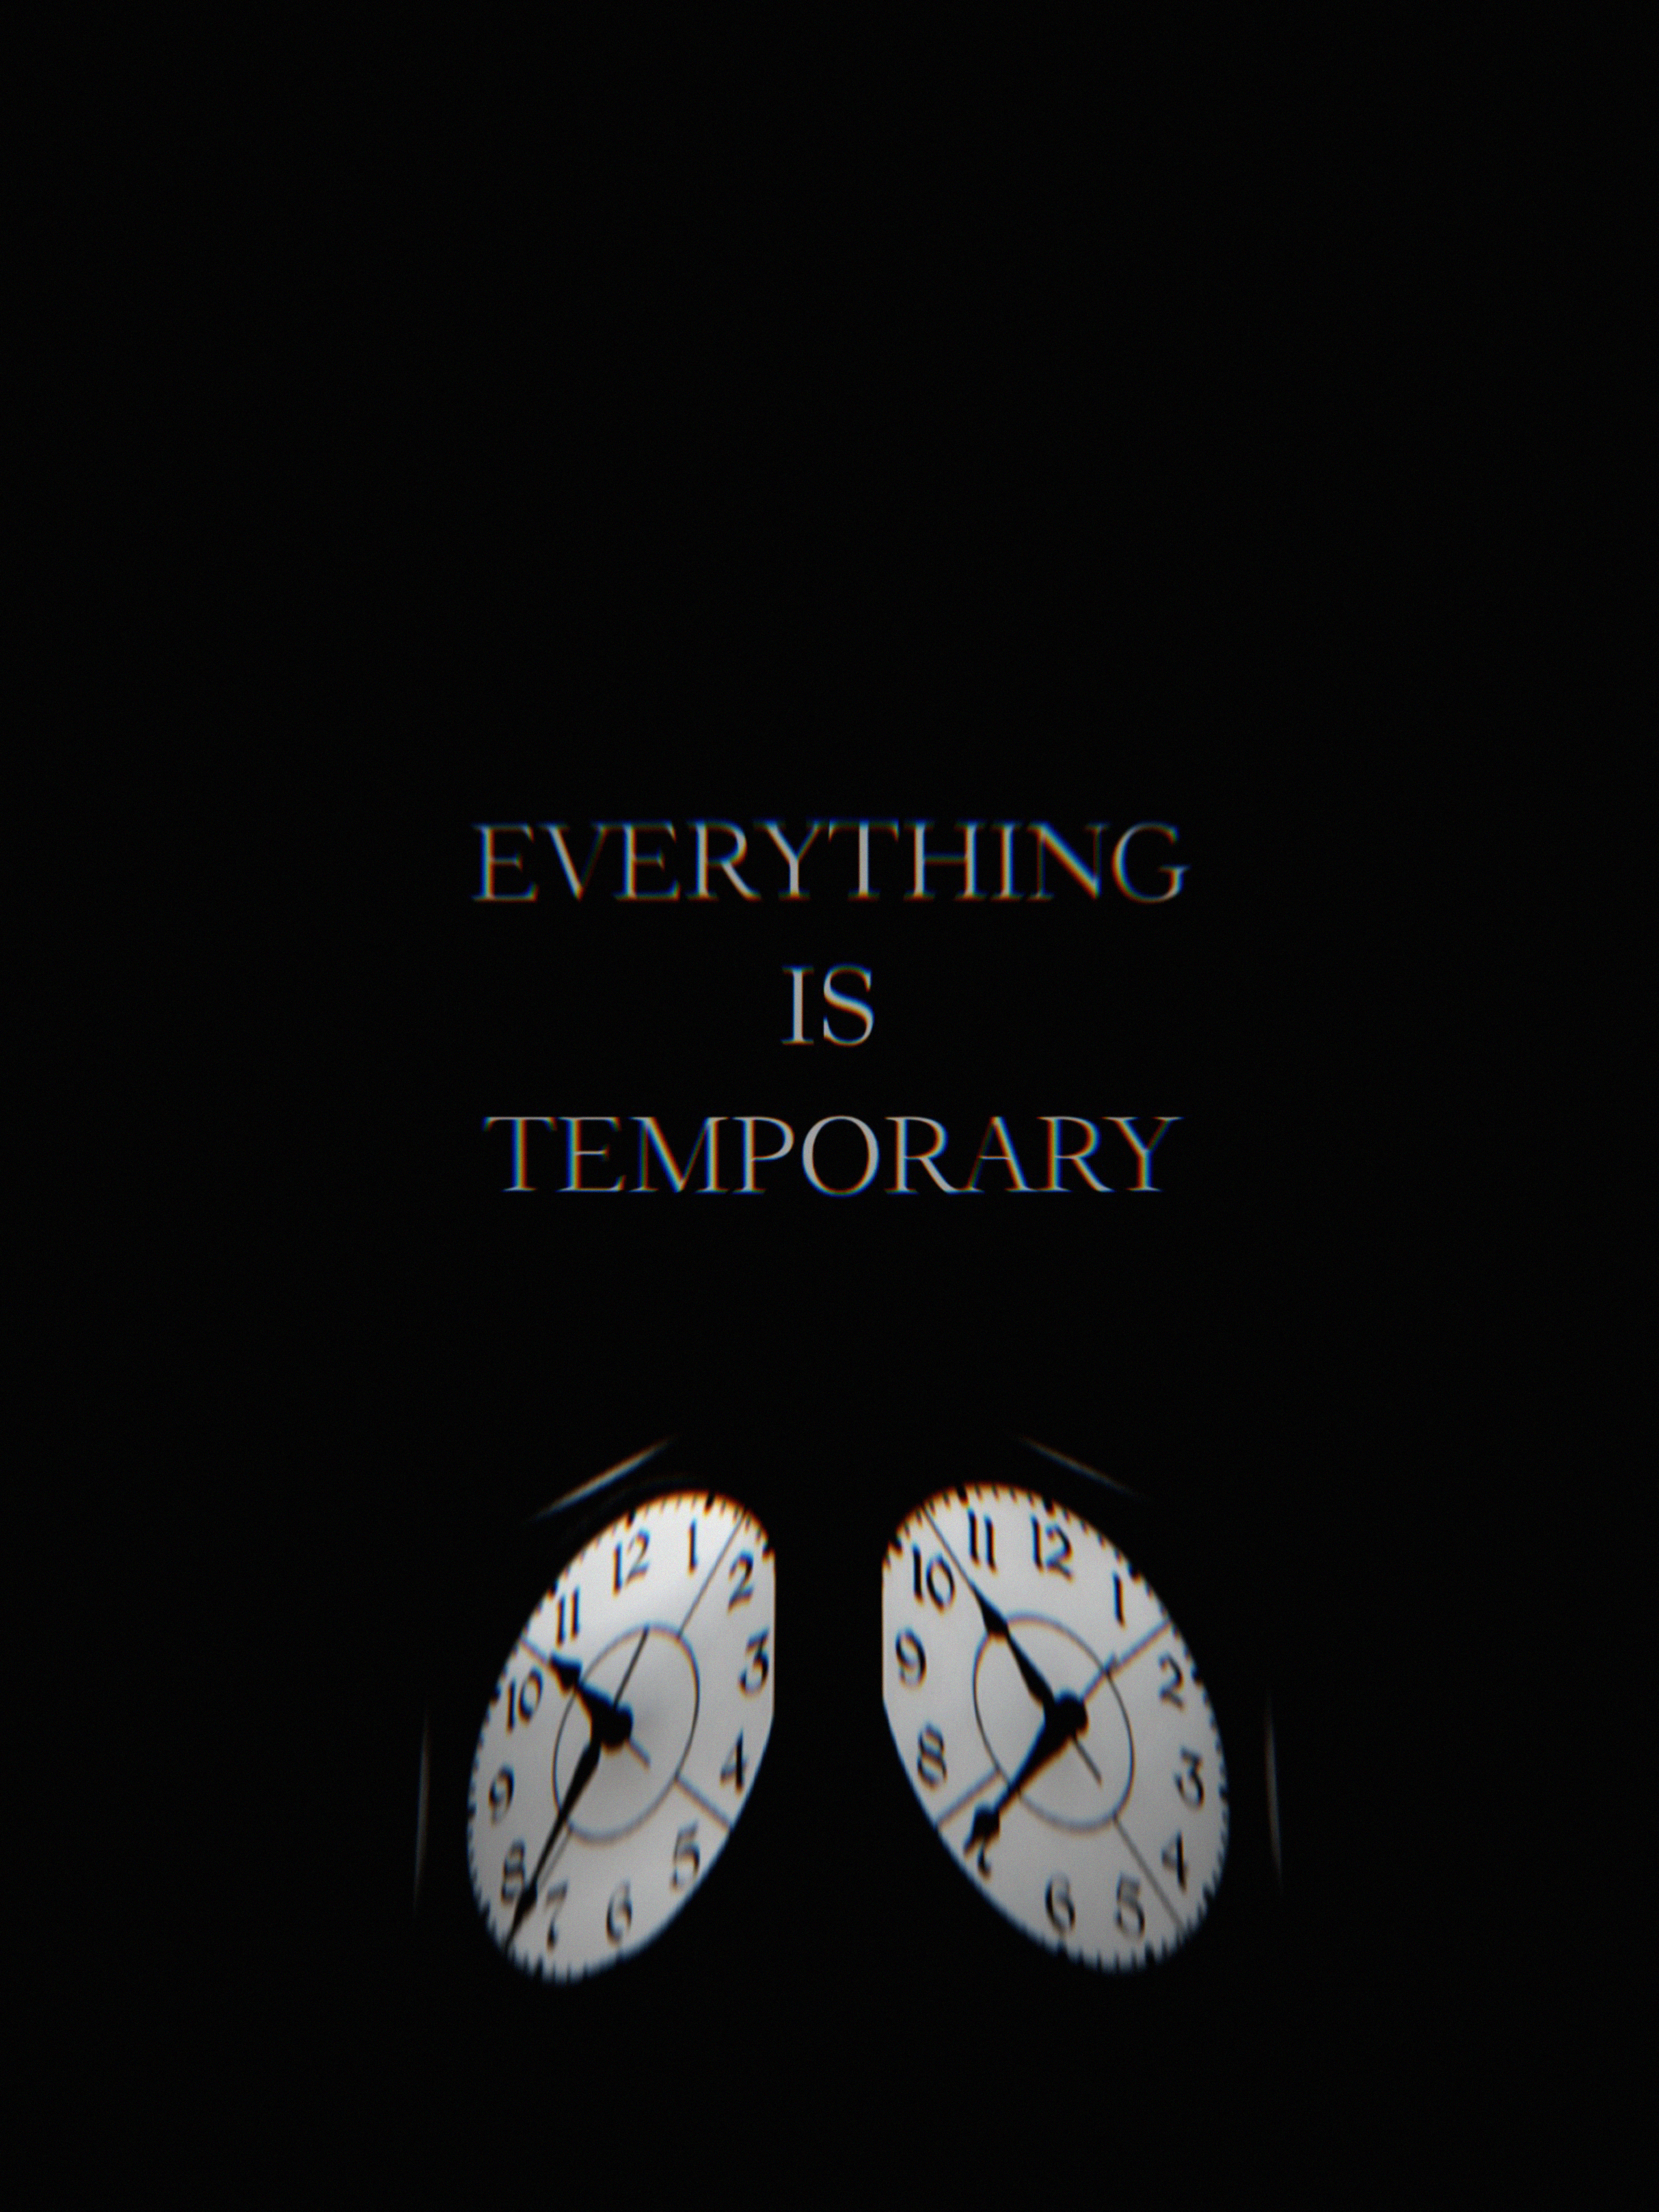 words, life, it's time, time, clock, glitch, temporary UHD